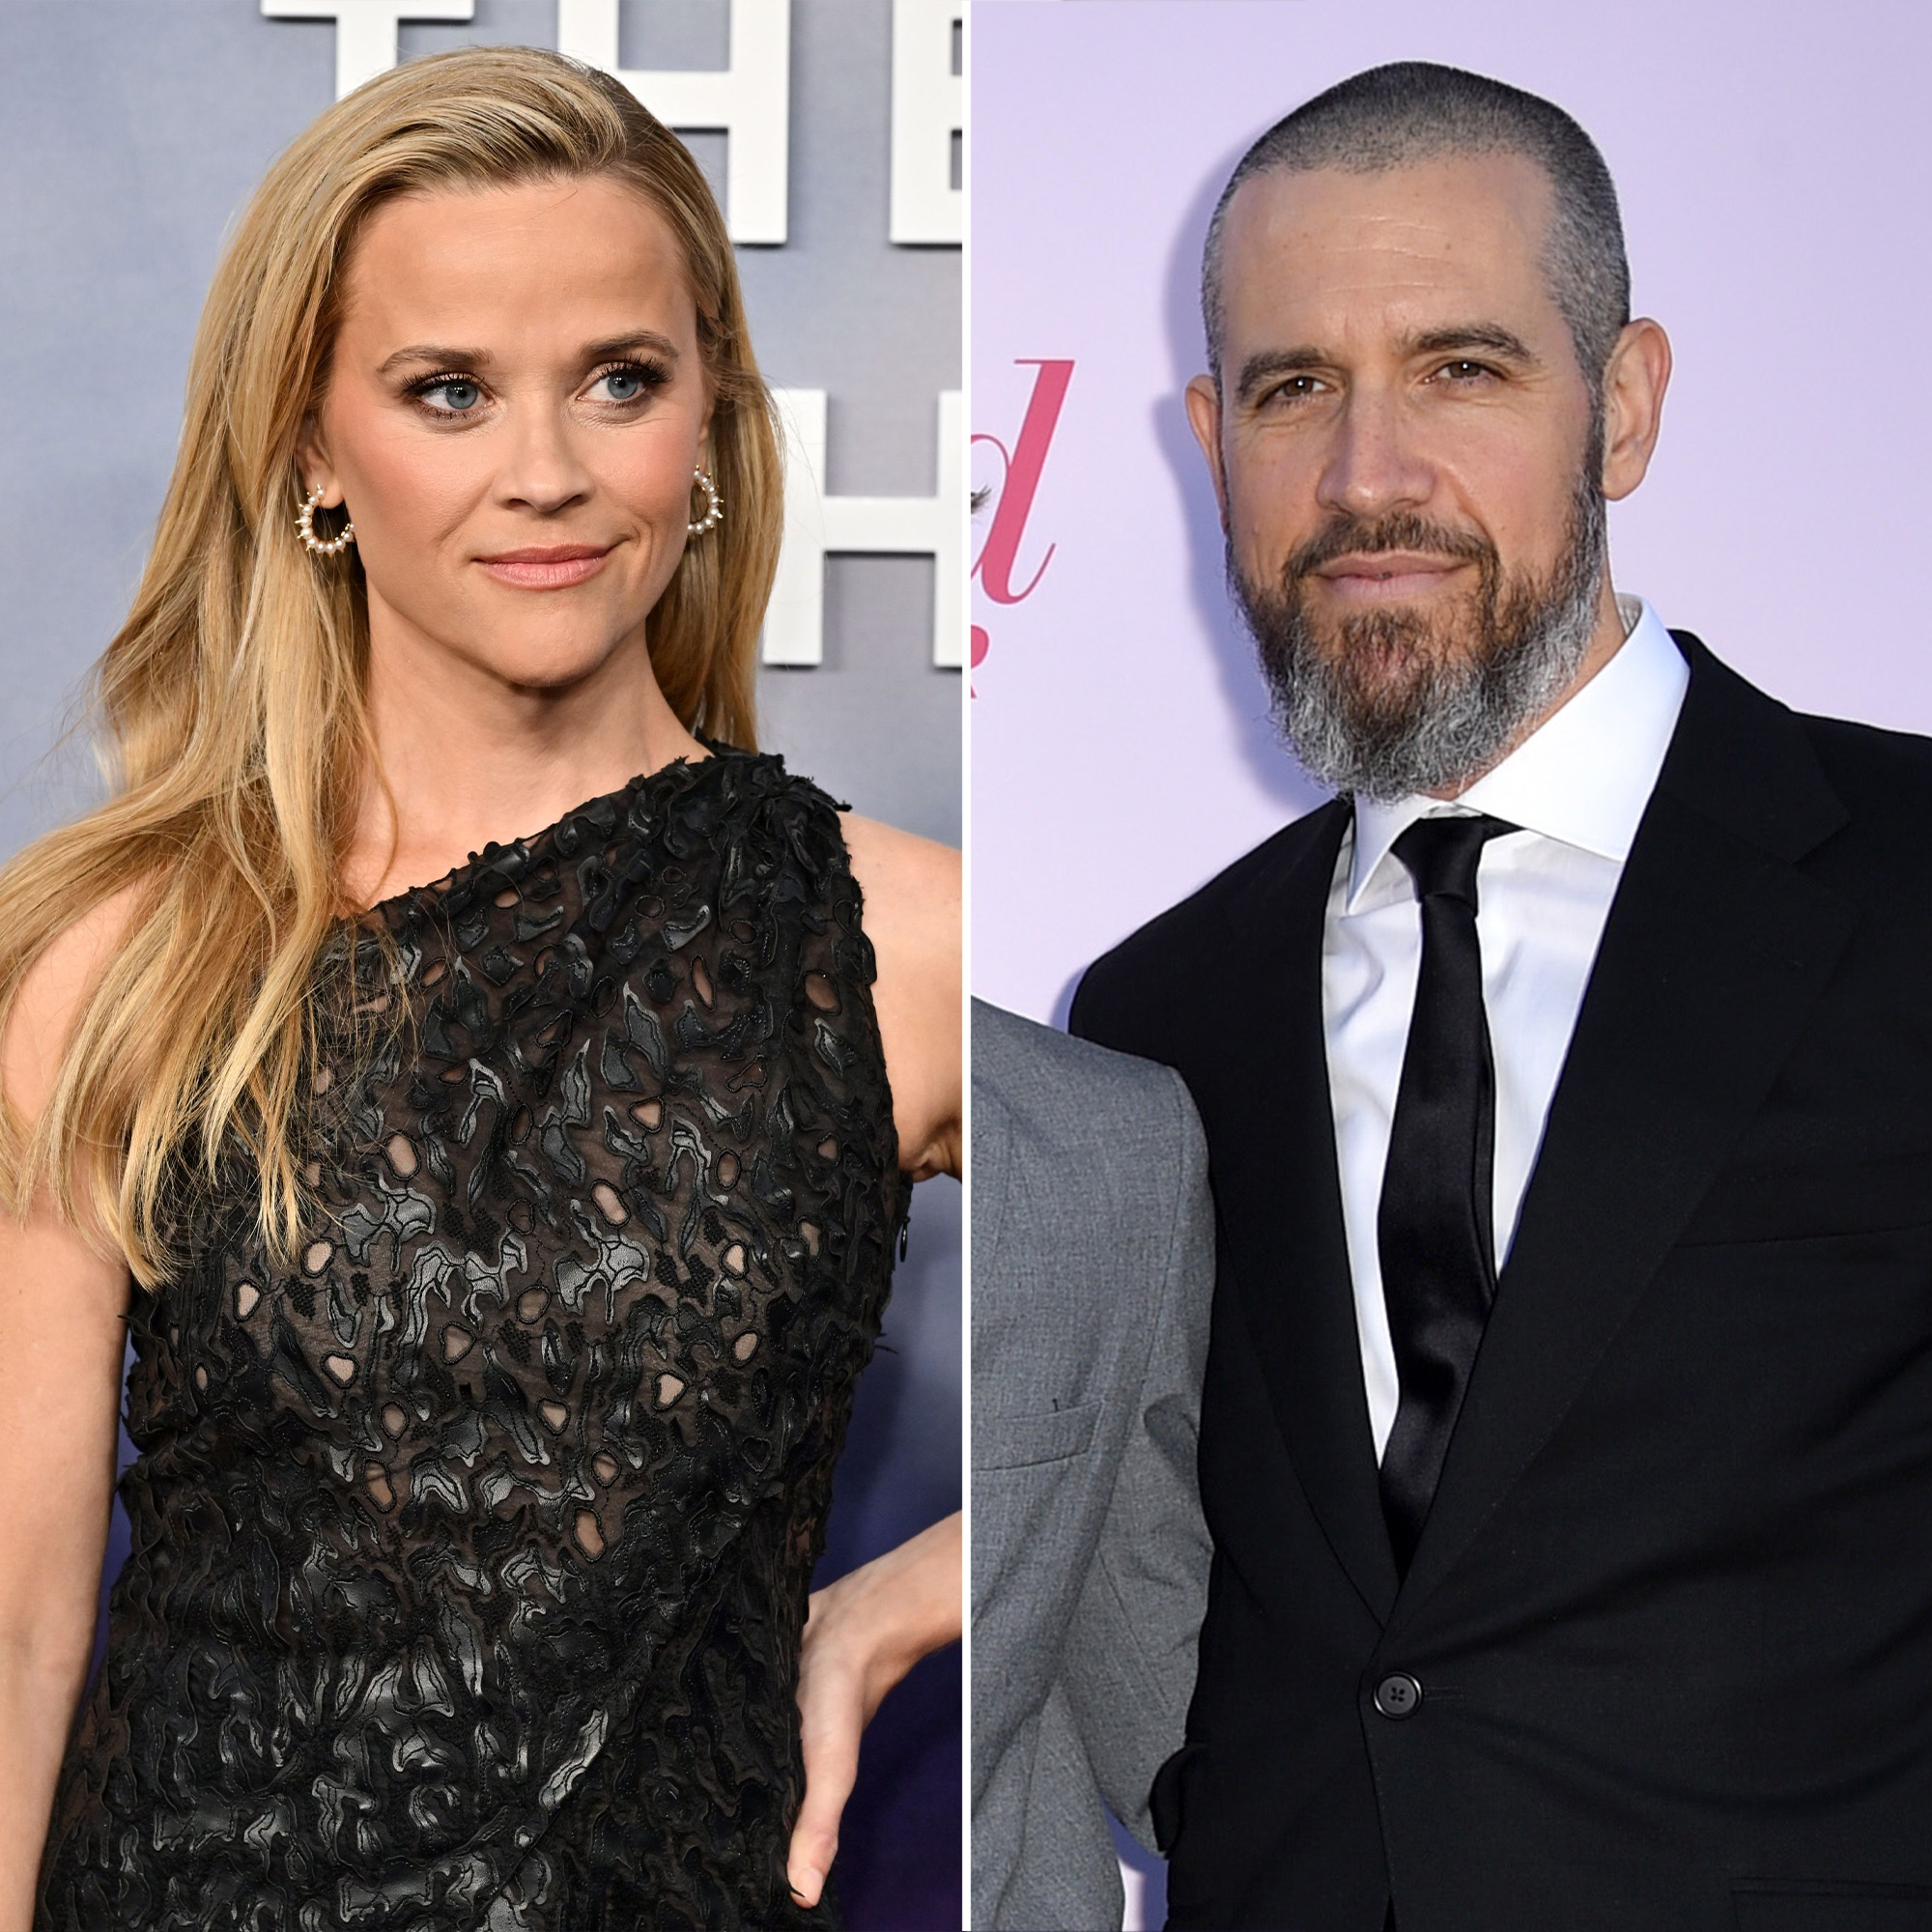 Reese Witherspoon divorcing Jim Toth